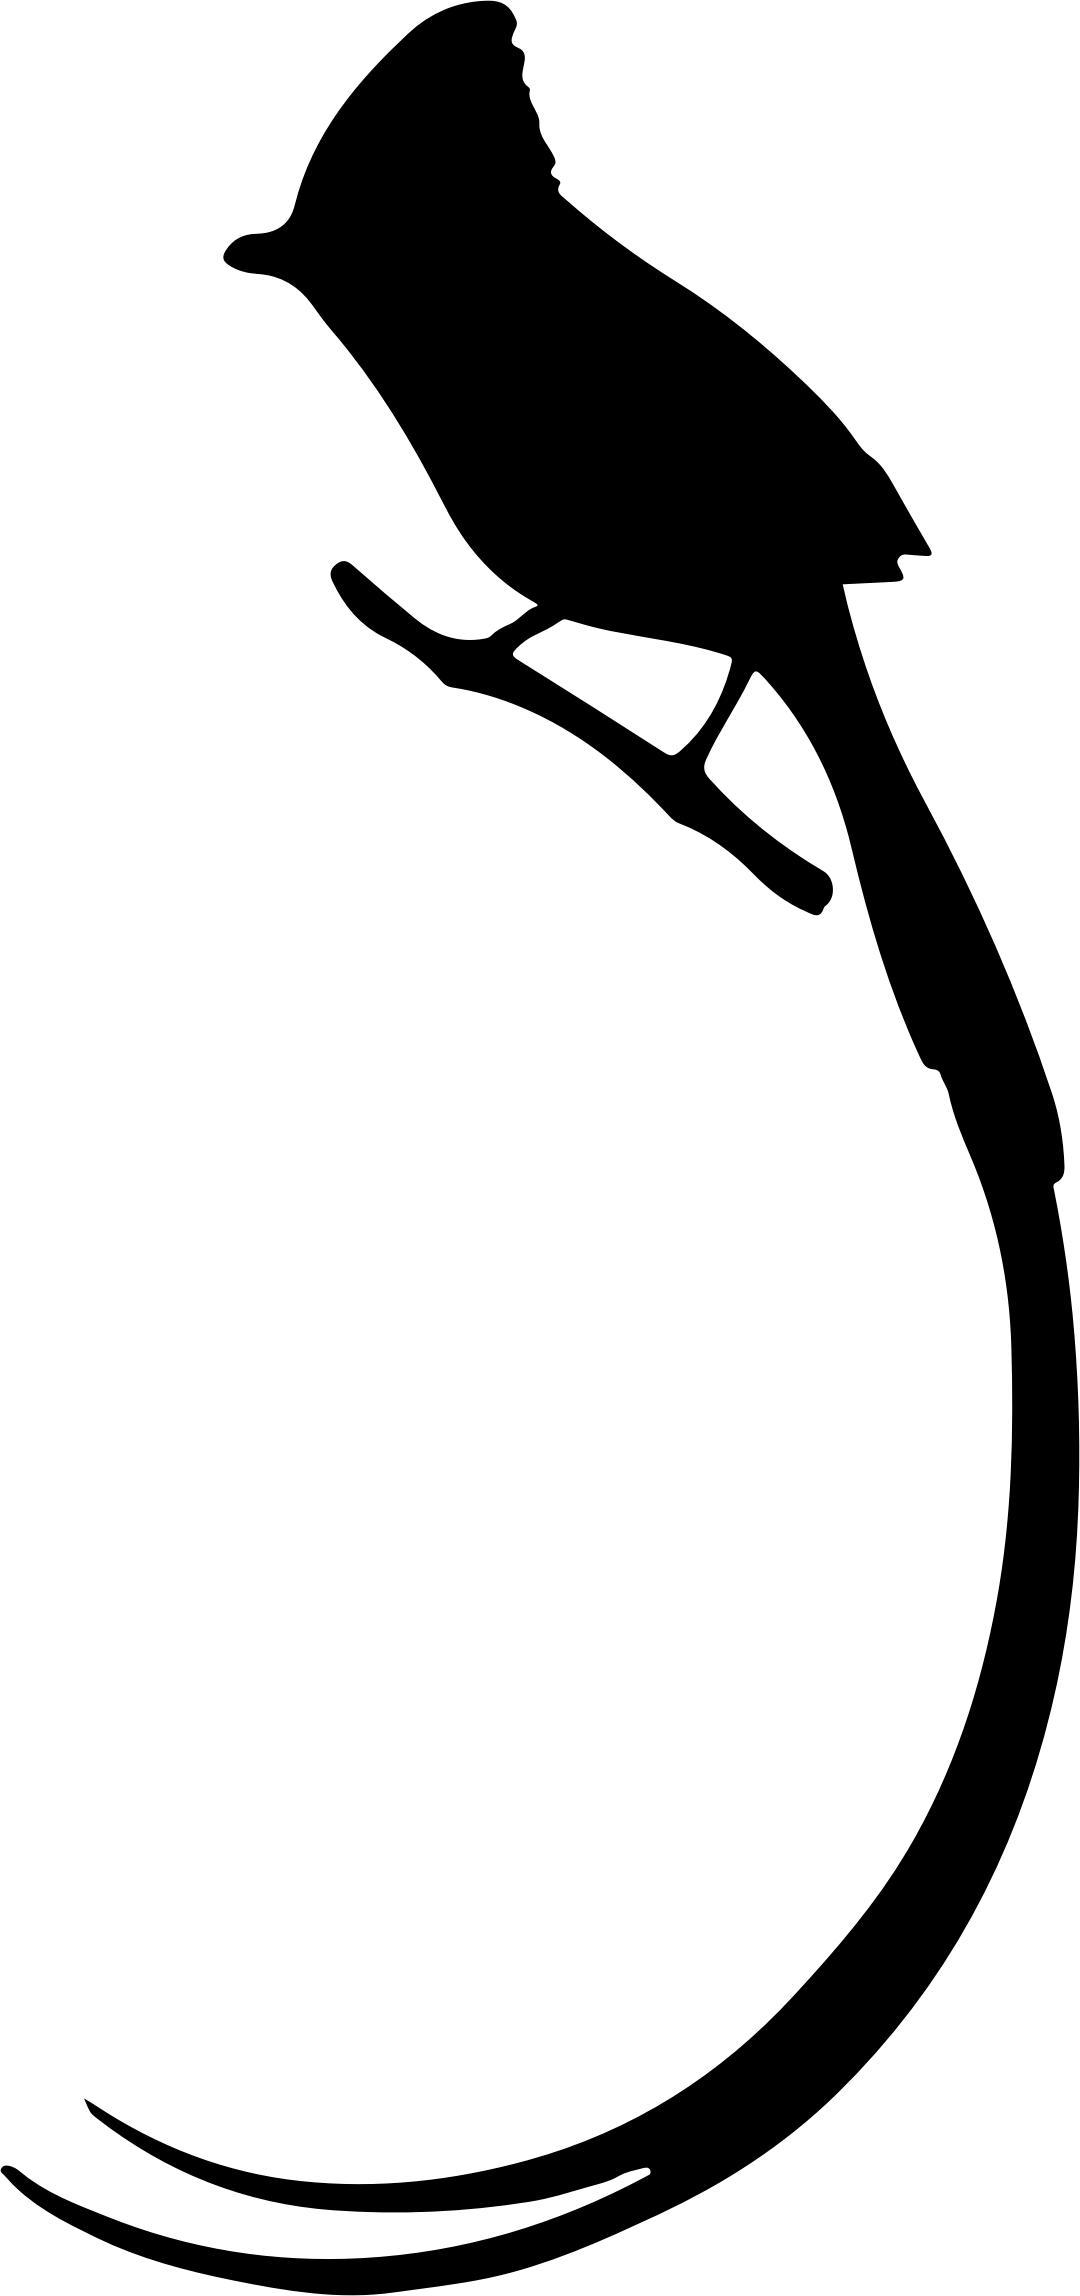 Long Tailed Bird Silhouette png transparent